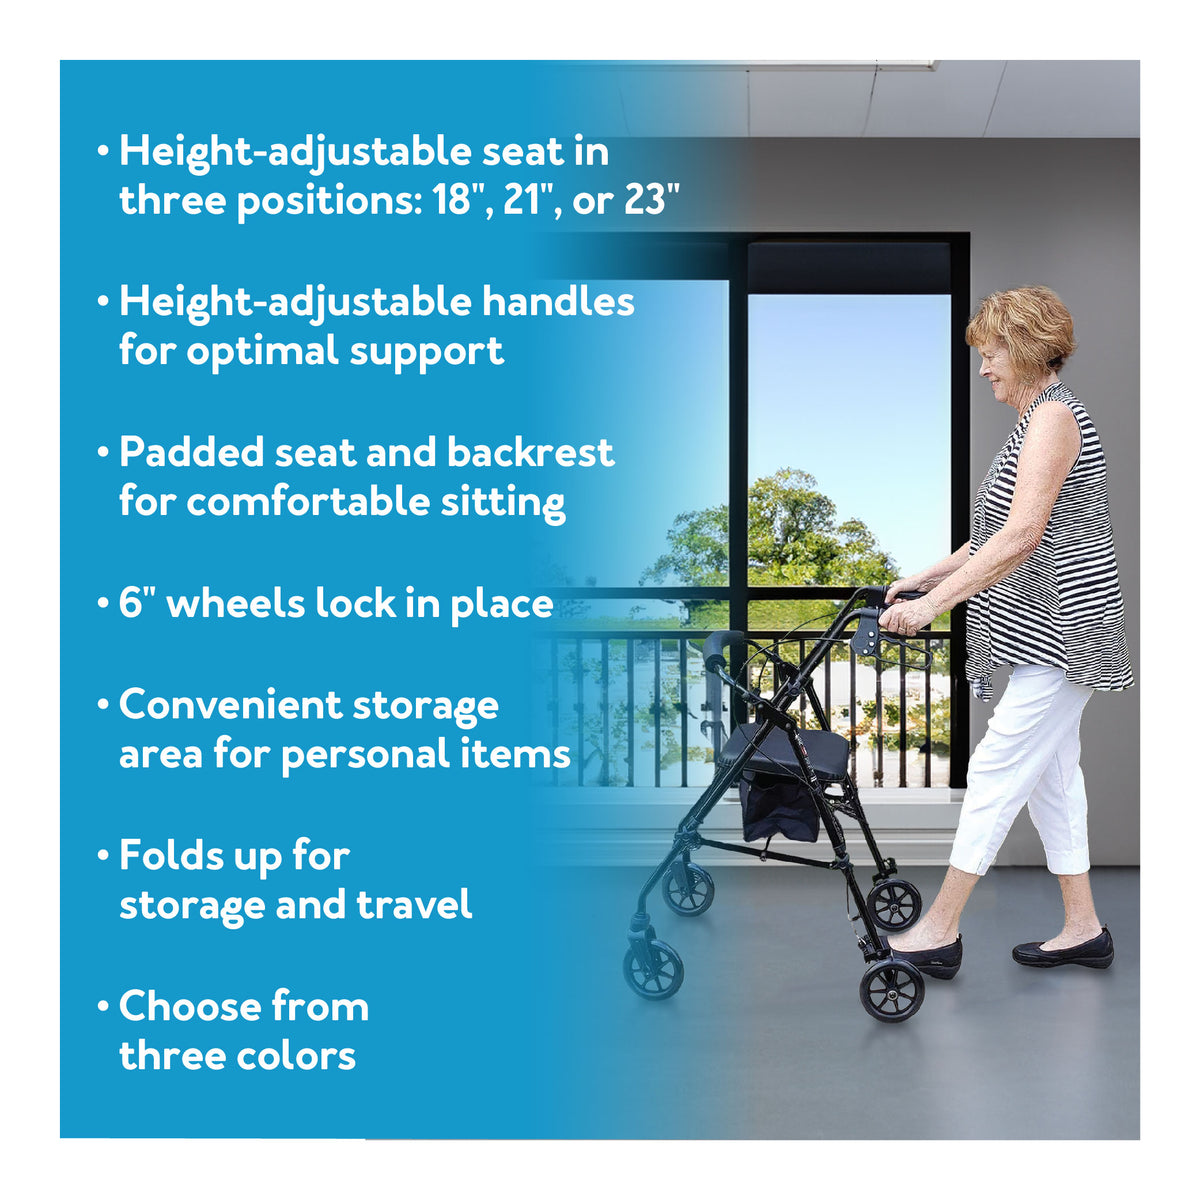 An elderly woman walking with a rollator with descriptive text next to the image